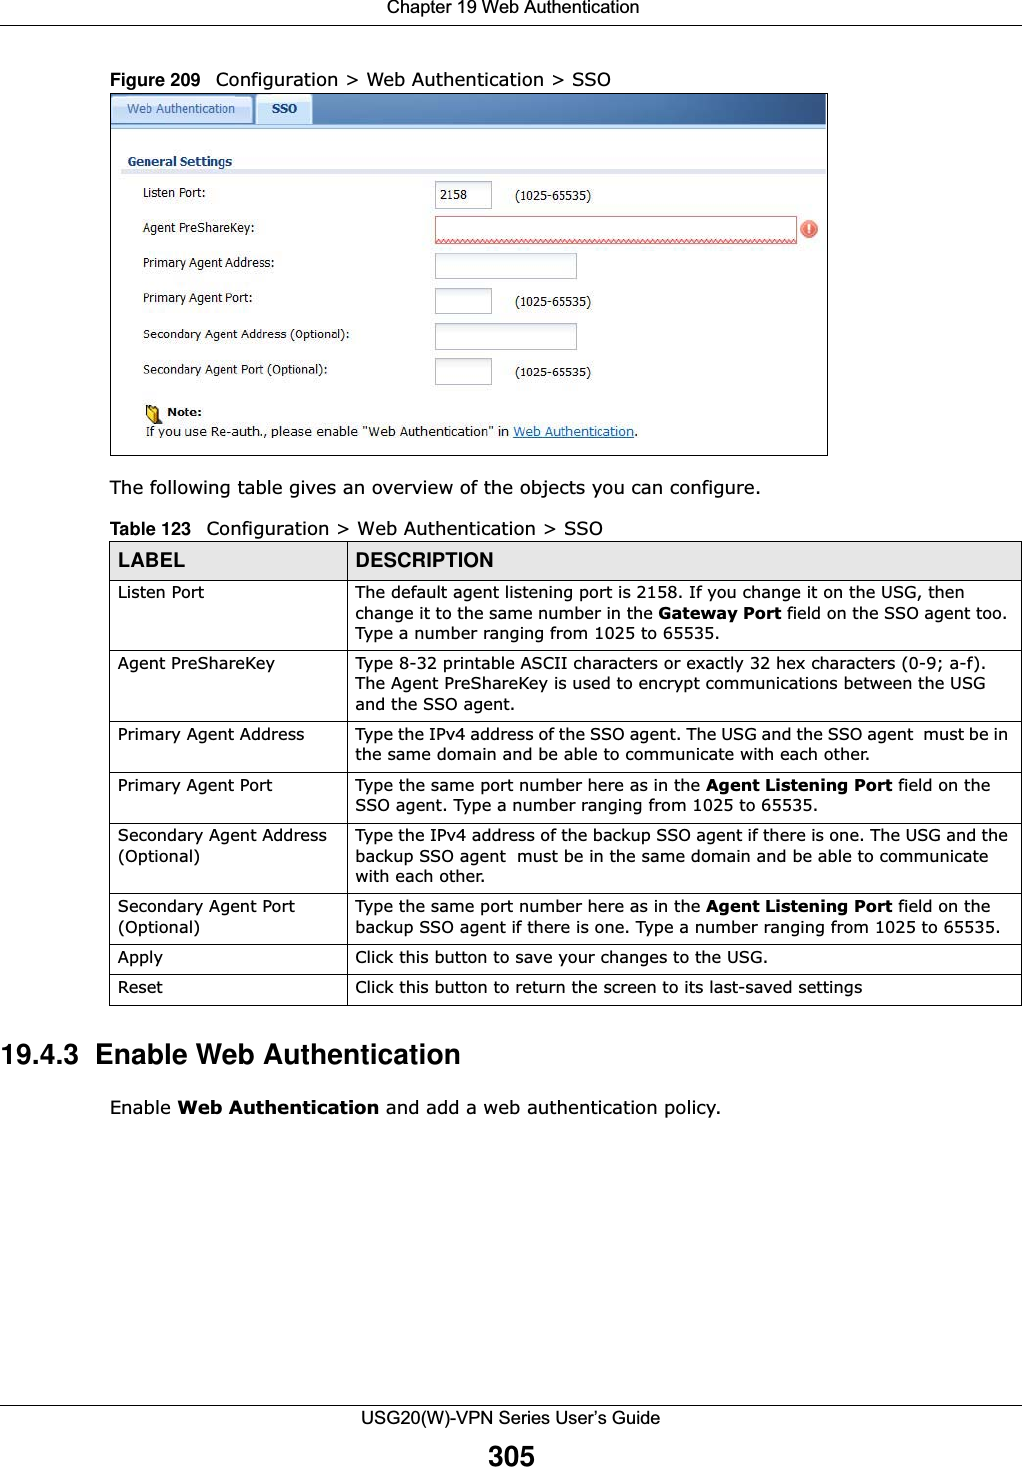  Chapter 19 Web AuthenticationUSG20(W)-VPN Series User’s Guide305Figure 209   Configuration &gt; Web Authentication &gt; SSOThe following table gives an overview of the objects you can configure. 19.4.3  Enable Web AuthenticationEnable Web Authentication and add a web authentication policy. Table 123   Configuration &gt; Web Authentication &gt; SSOLABEL DESCRIPTIONListen Port The default agent listening port is 2158. If you change it on the USG, then change it to the same number in the Gateway Port field on the SSO agent too. Type a number ranging from 1025 to 65535.Agent PreShareKey Type 8-32 printable ASCII characters or exactly 32 hex characters (0-9; a-f).  The Agent PreShareKey is used to encrypt communications between the USG and the SSO agent.Primary Agent Address Type the IPv4 address of the SSO agent. The USG and the SSO agent  must be in the same domain and be able to communicate with each other.Primary Agent Port Type the same port number here as in the Agent Listening Port field on the SSO agent. Type a number ranging from 1025 to 65535.Secondary Agent Address (Optional)Type the IPv4 address of the backup SSO agent if there is one. The USG and the backup SSO agent  must be in the same domain and be able to communicate with each other.Secondary Agent Port (Optional)Type the same port number here as in the Agent Listening Port field on the backup SSO agent if there is one. Type a number ranging from 1025 to 65535.Apply Click this button to save your changes to the USG.Reset Click this button to return the screen to its last-saved settings